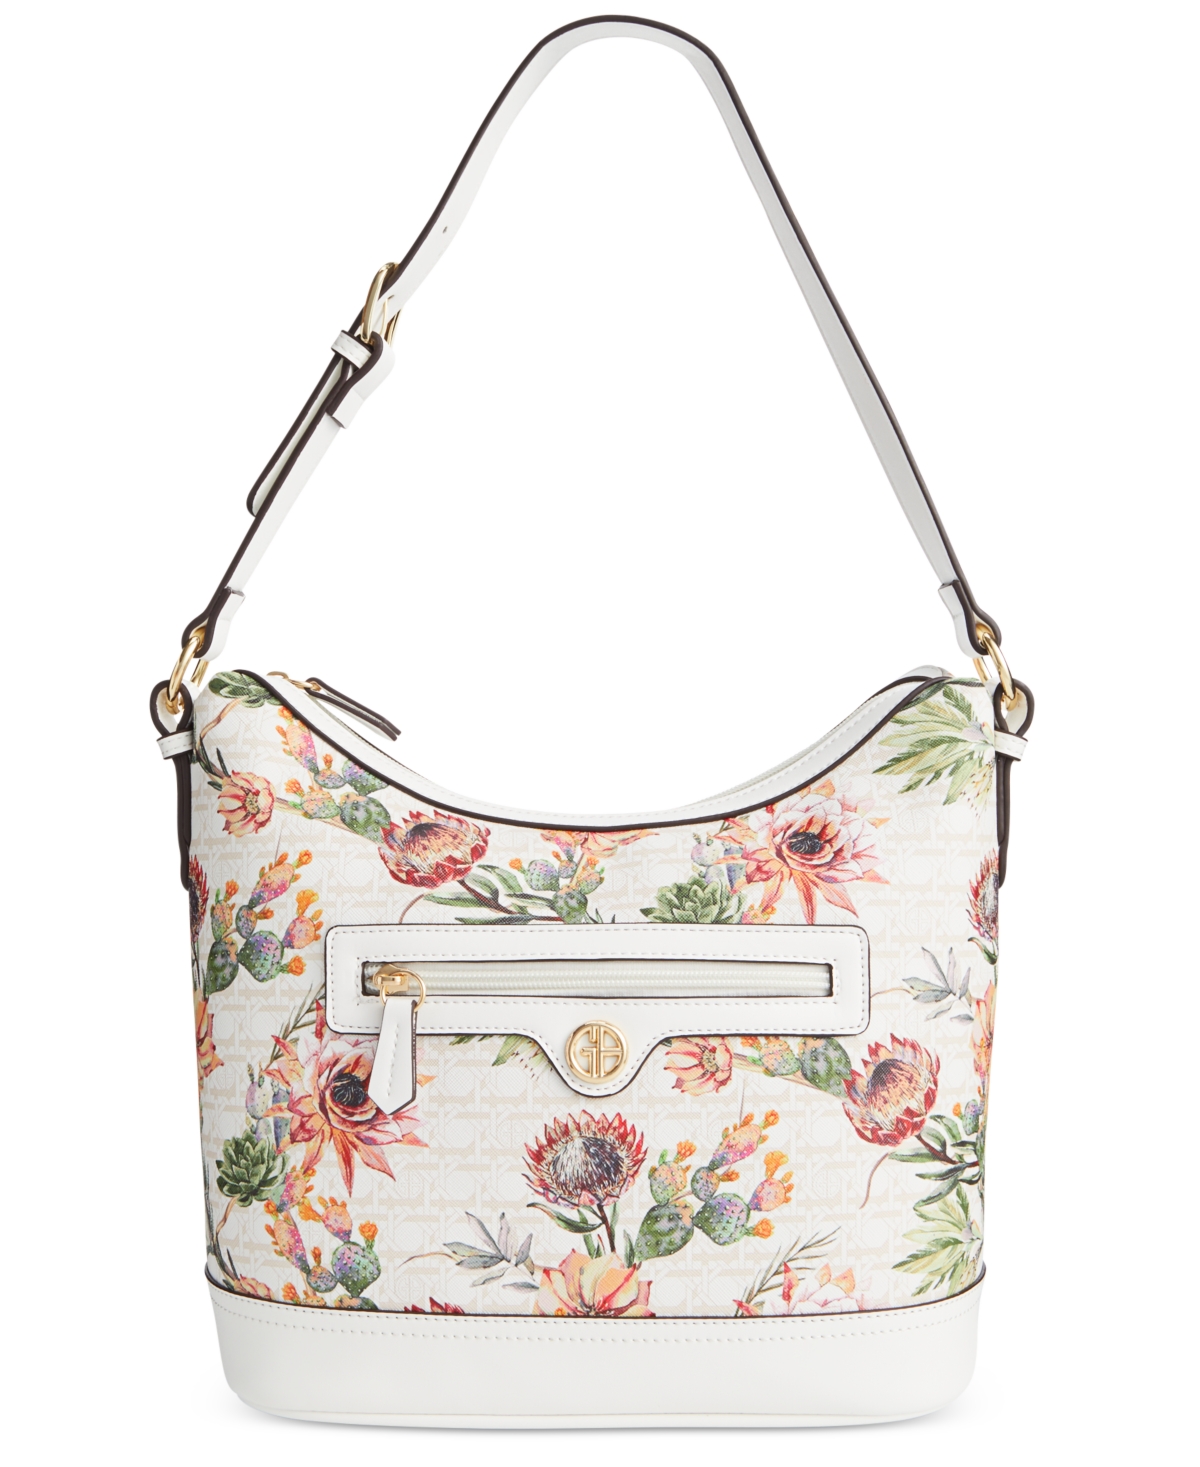 Macy's Small Bags & Handbags for Women for sale